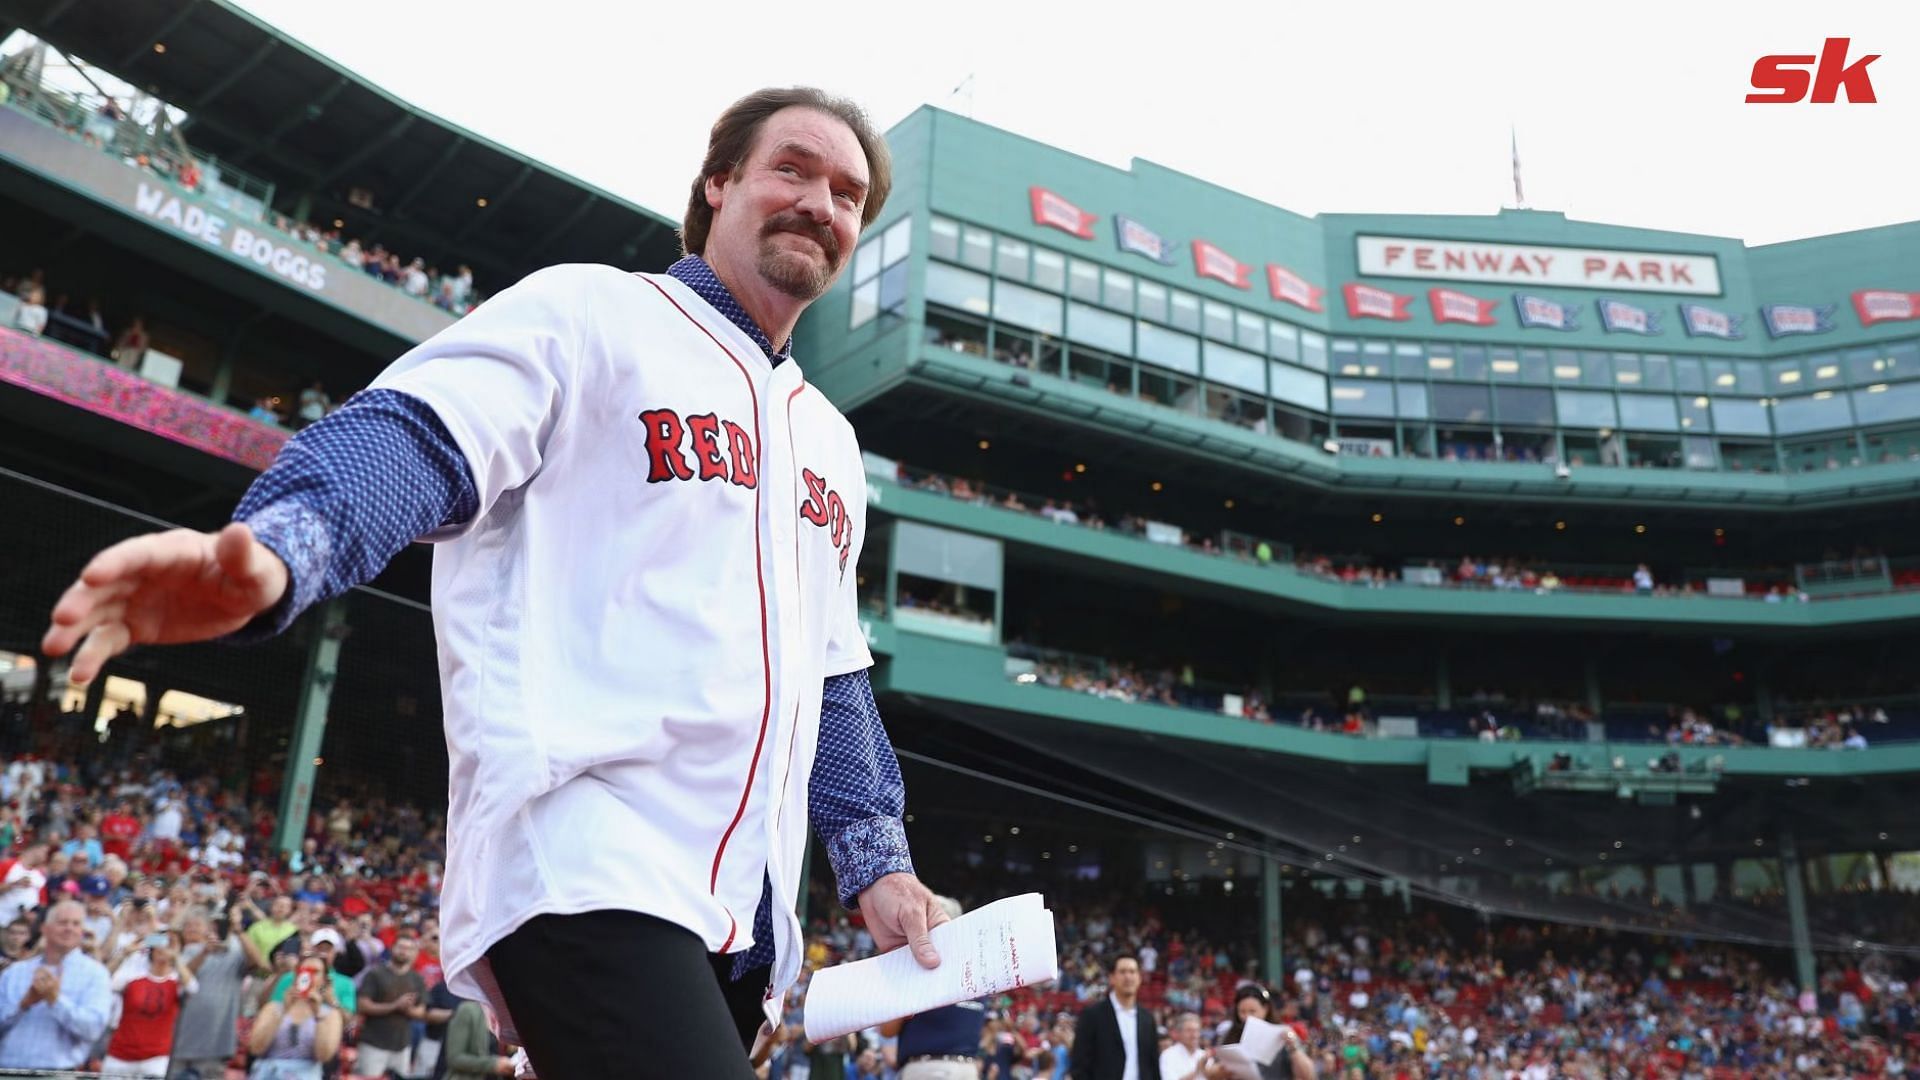 Wade Boggs discusses the unfair criticism he received after switching from the Red Sox to the rival Yankees